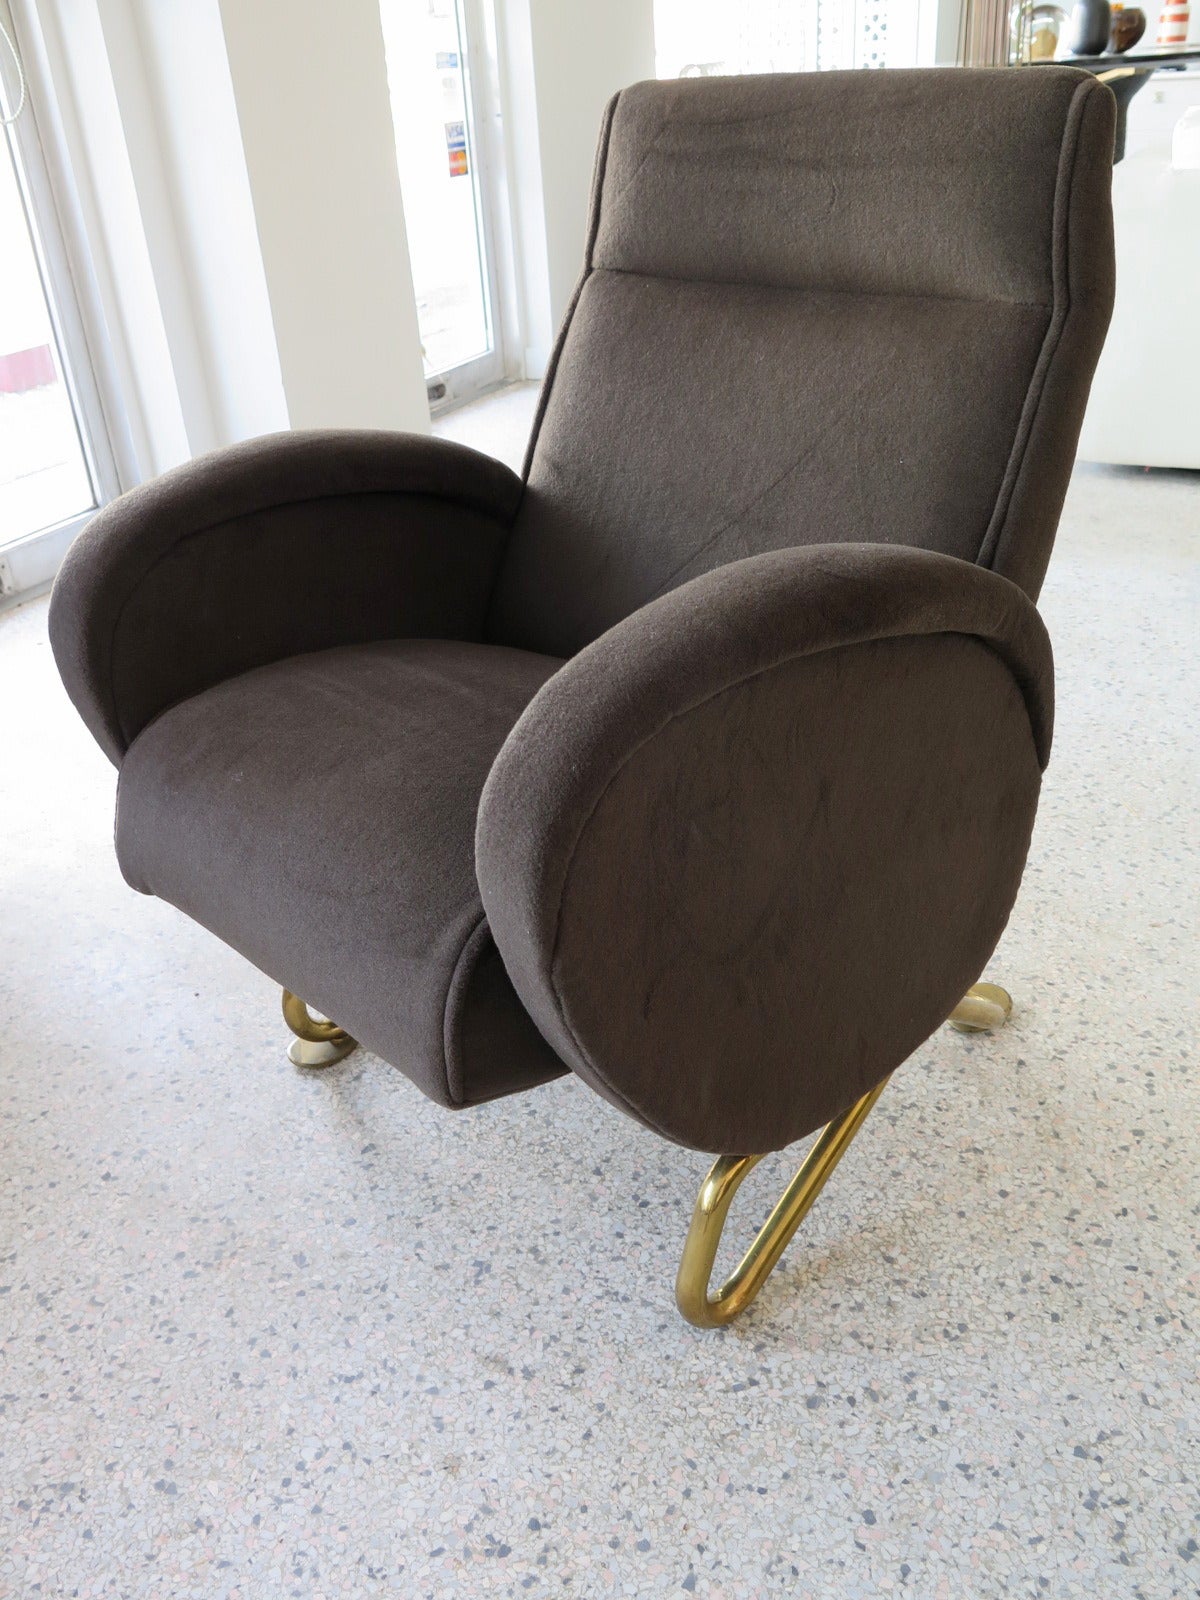 Two Carlo Mollino vintage chairs from Rai Auditorium, Torino.  Reupholstered in mohair.